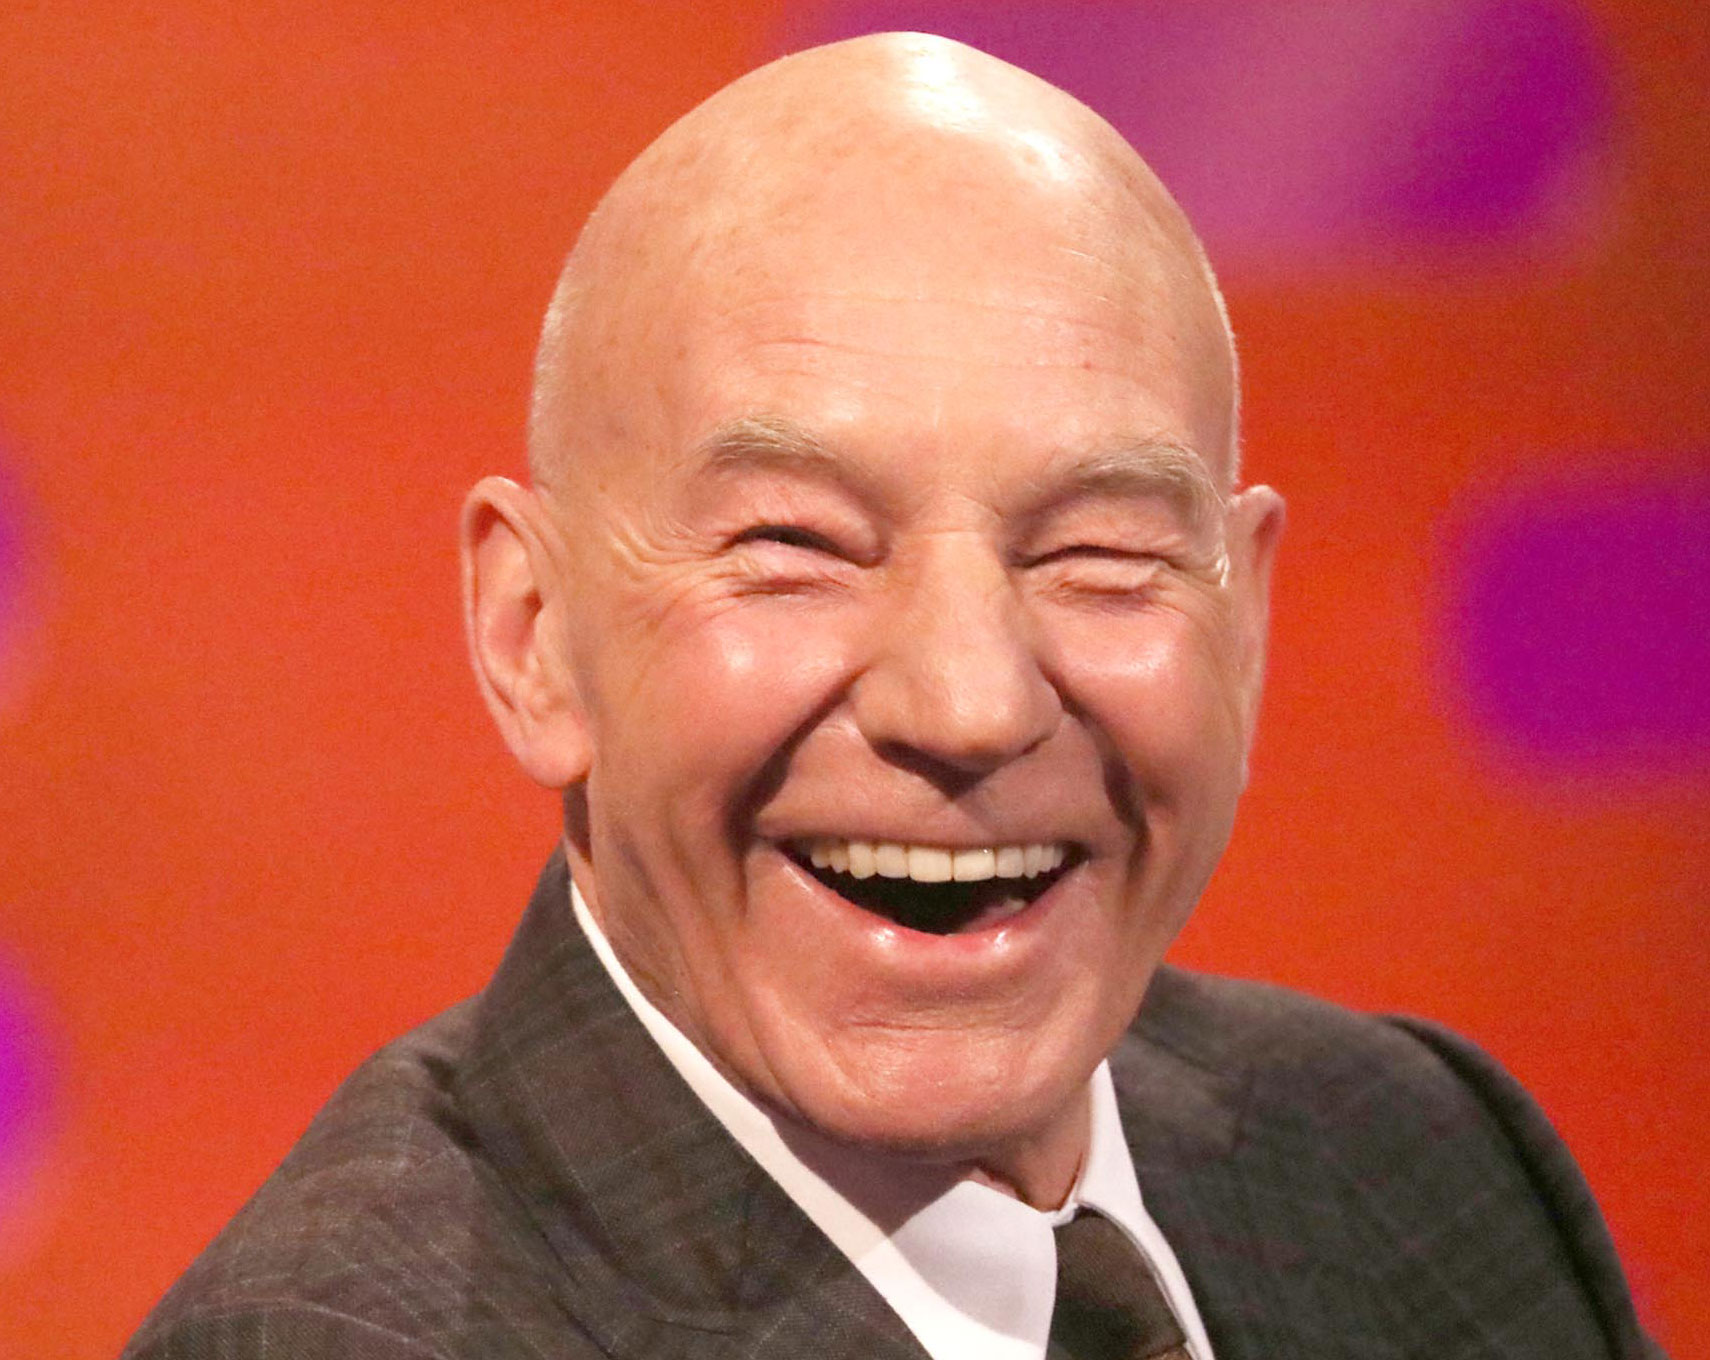 Patrick Stewart Admits To Using Weed For Arthritis! EMBED